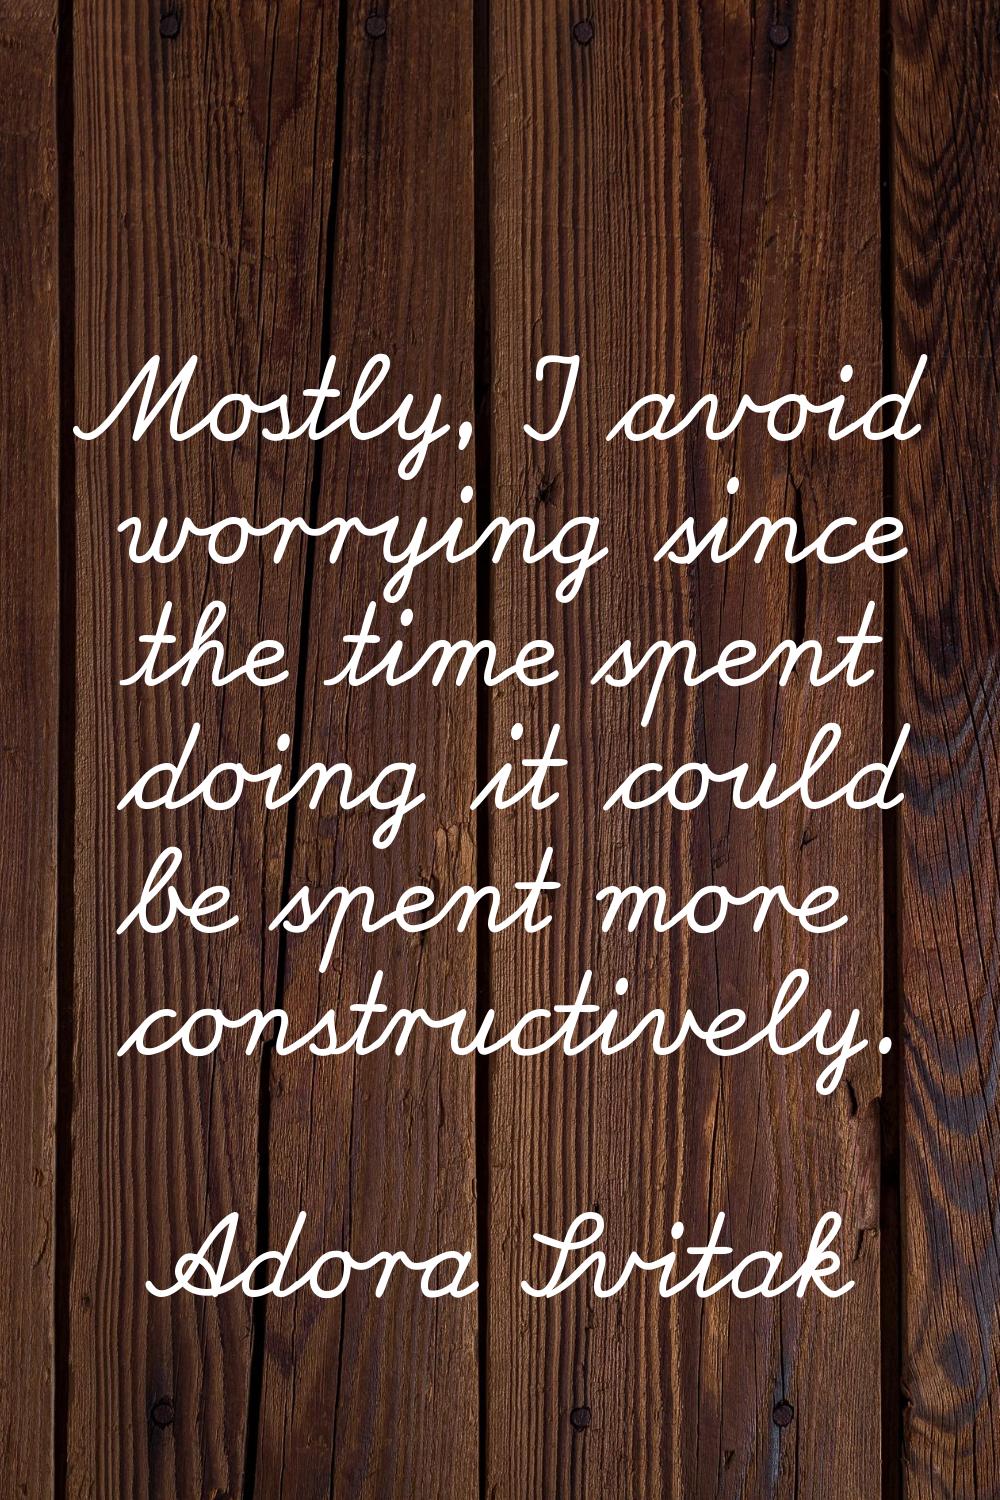 Mostly, I avoid worrying since the time spent doing it could be spent more constructively.